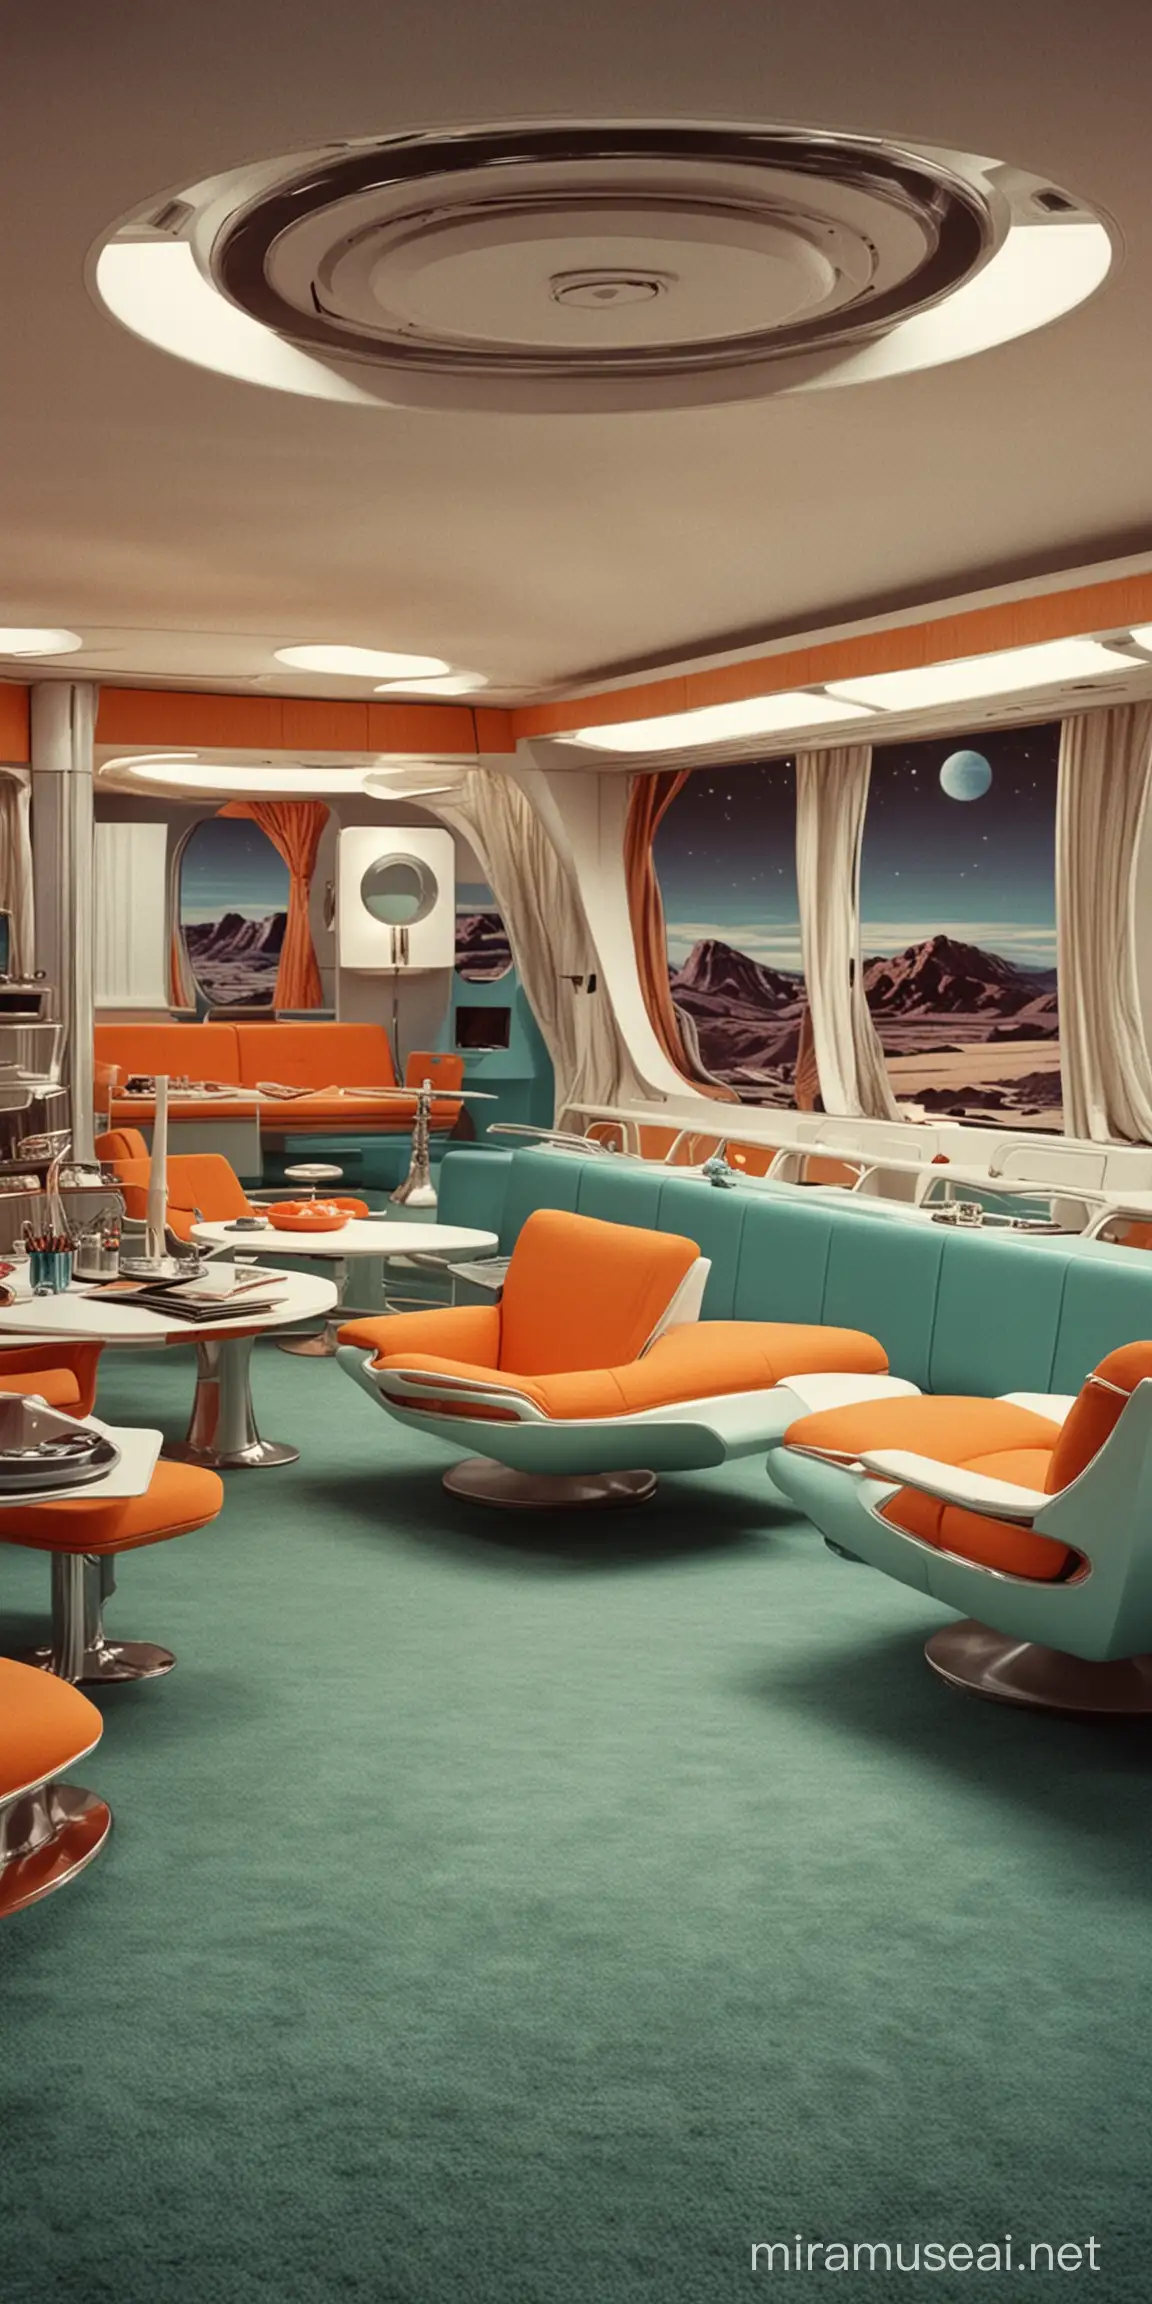 1960s space age interior background